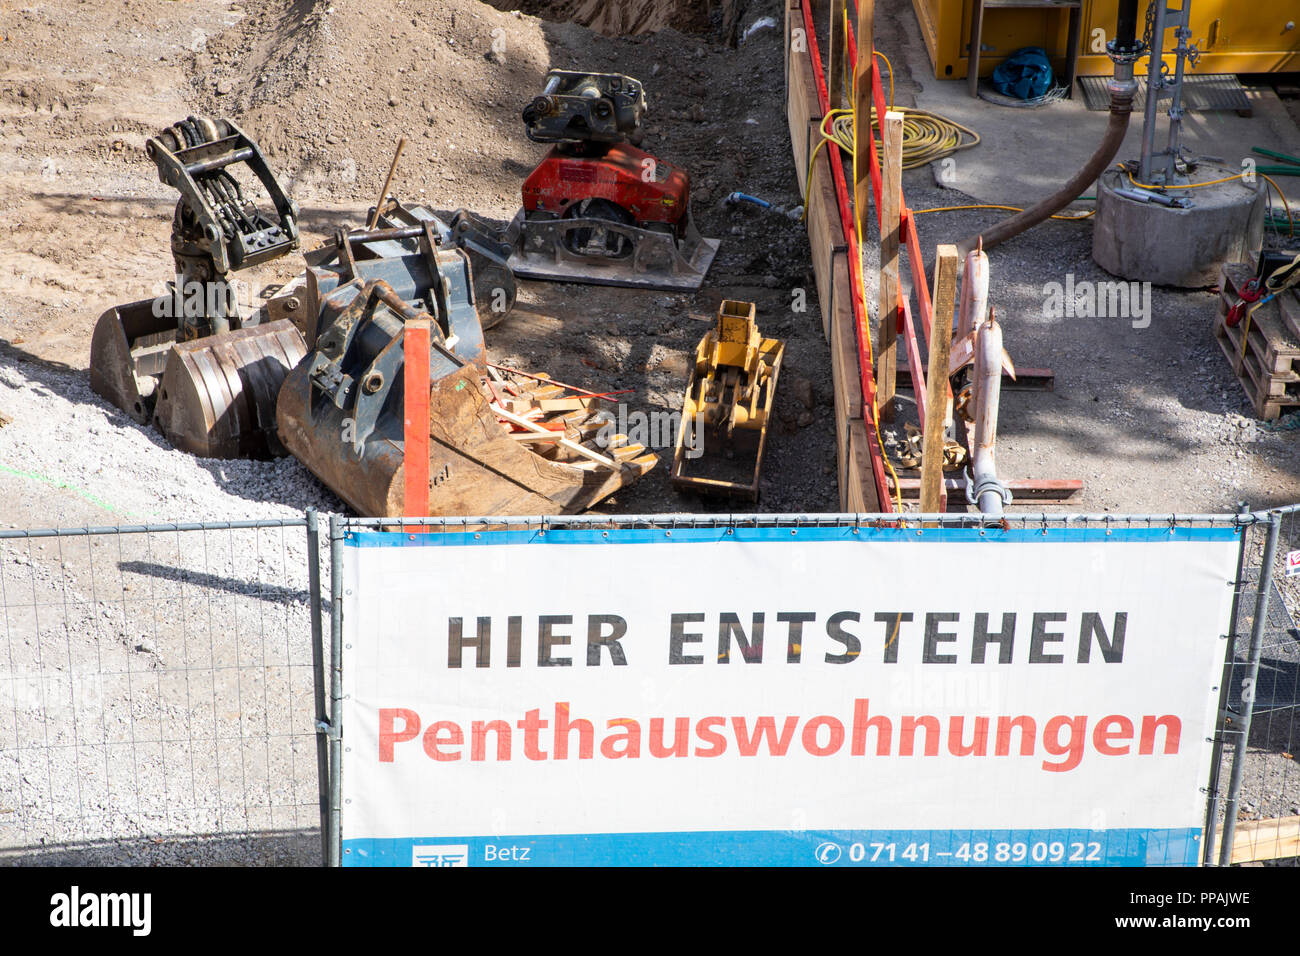 Construction site for a new residential building with condominiums and penthouse apartments, am Neckar, Heilbronn, Baden-Wurttemberg, Germany Stock Photo